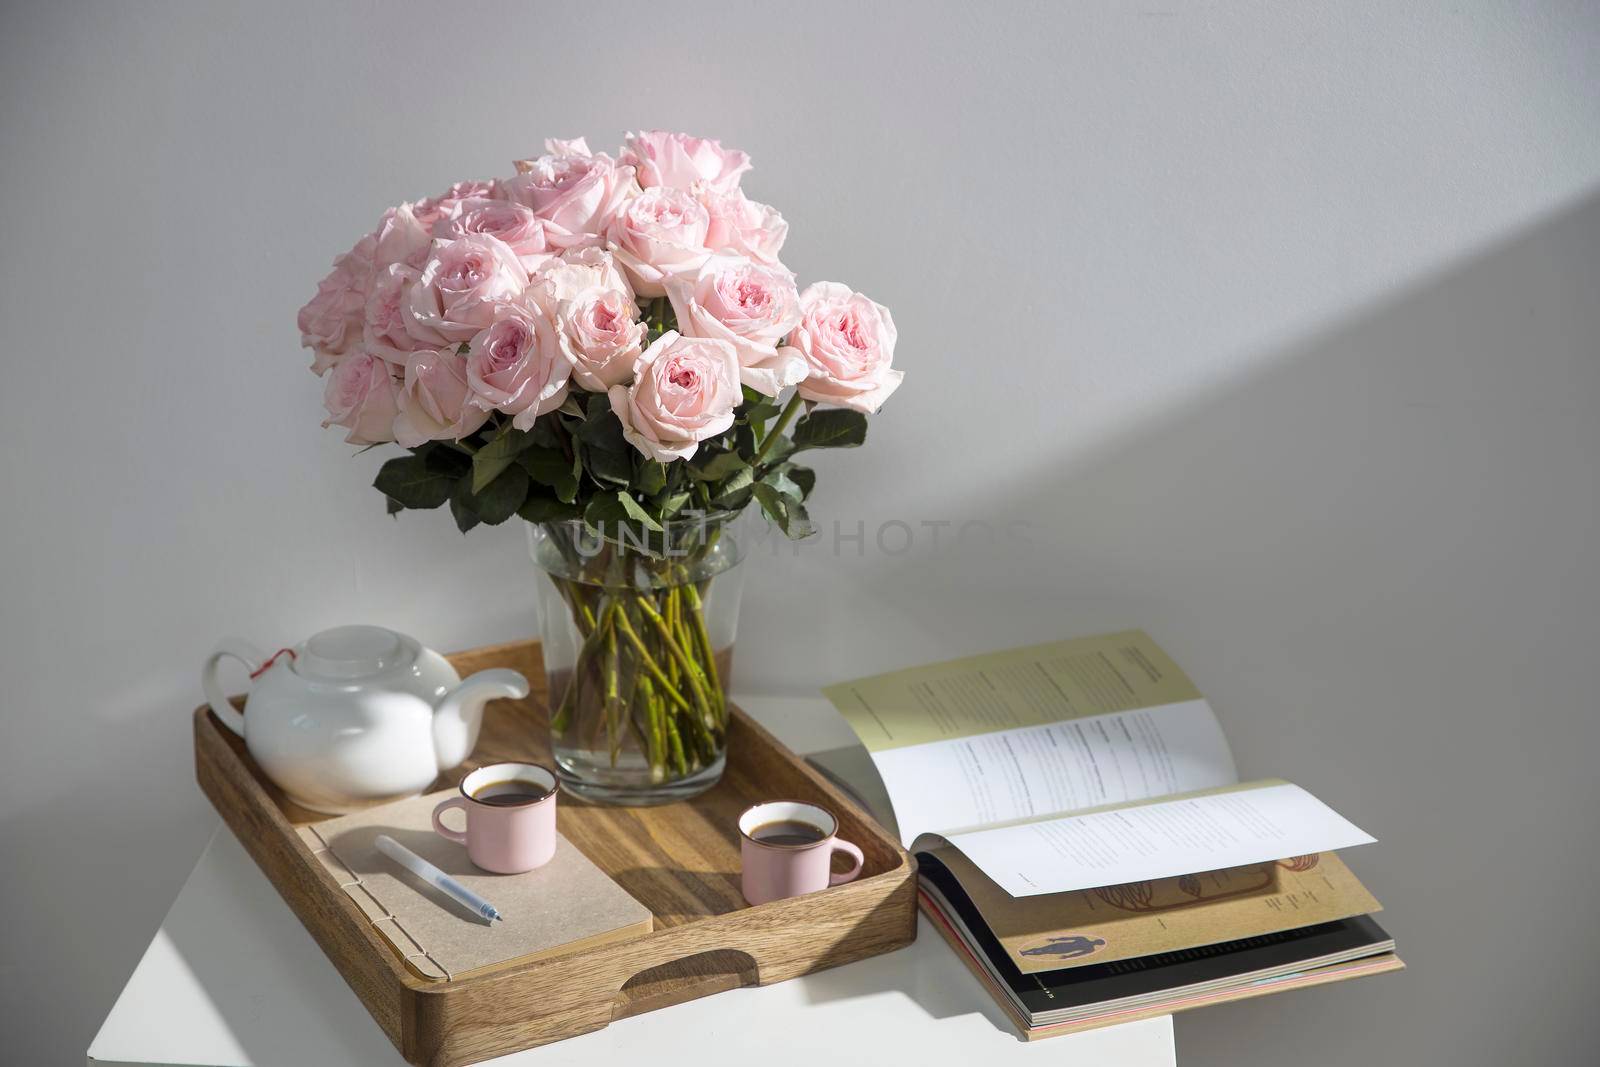 Rose White Pink O'hara. Bouquet of pink roses in a glass vase with a white teapot and two cappuccino cups on a tray on a coffee table among books.